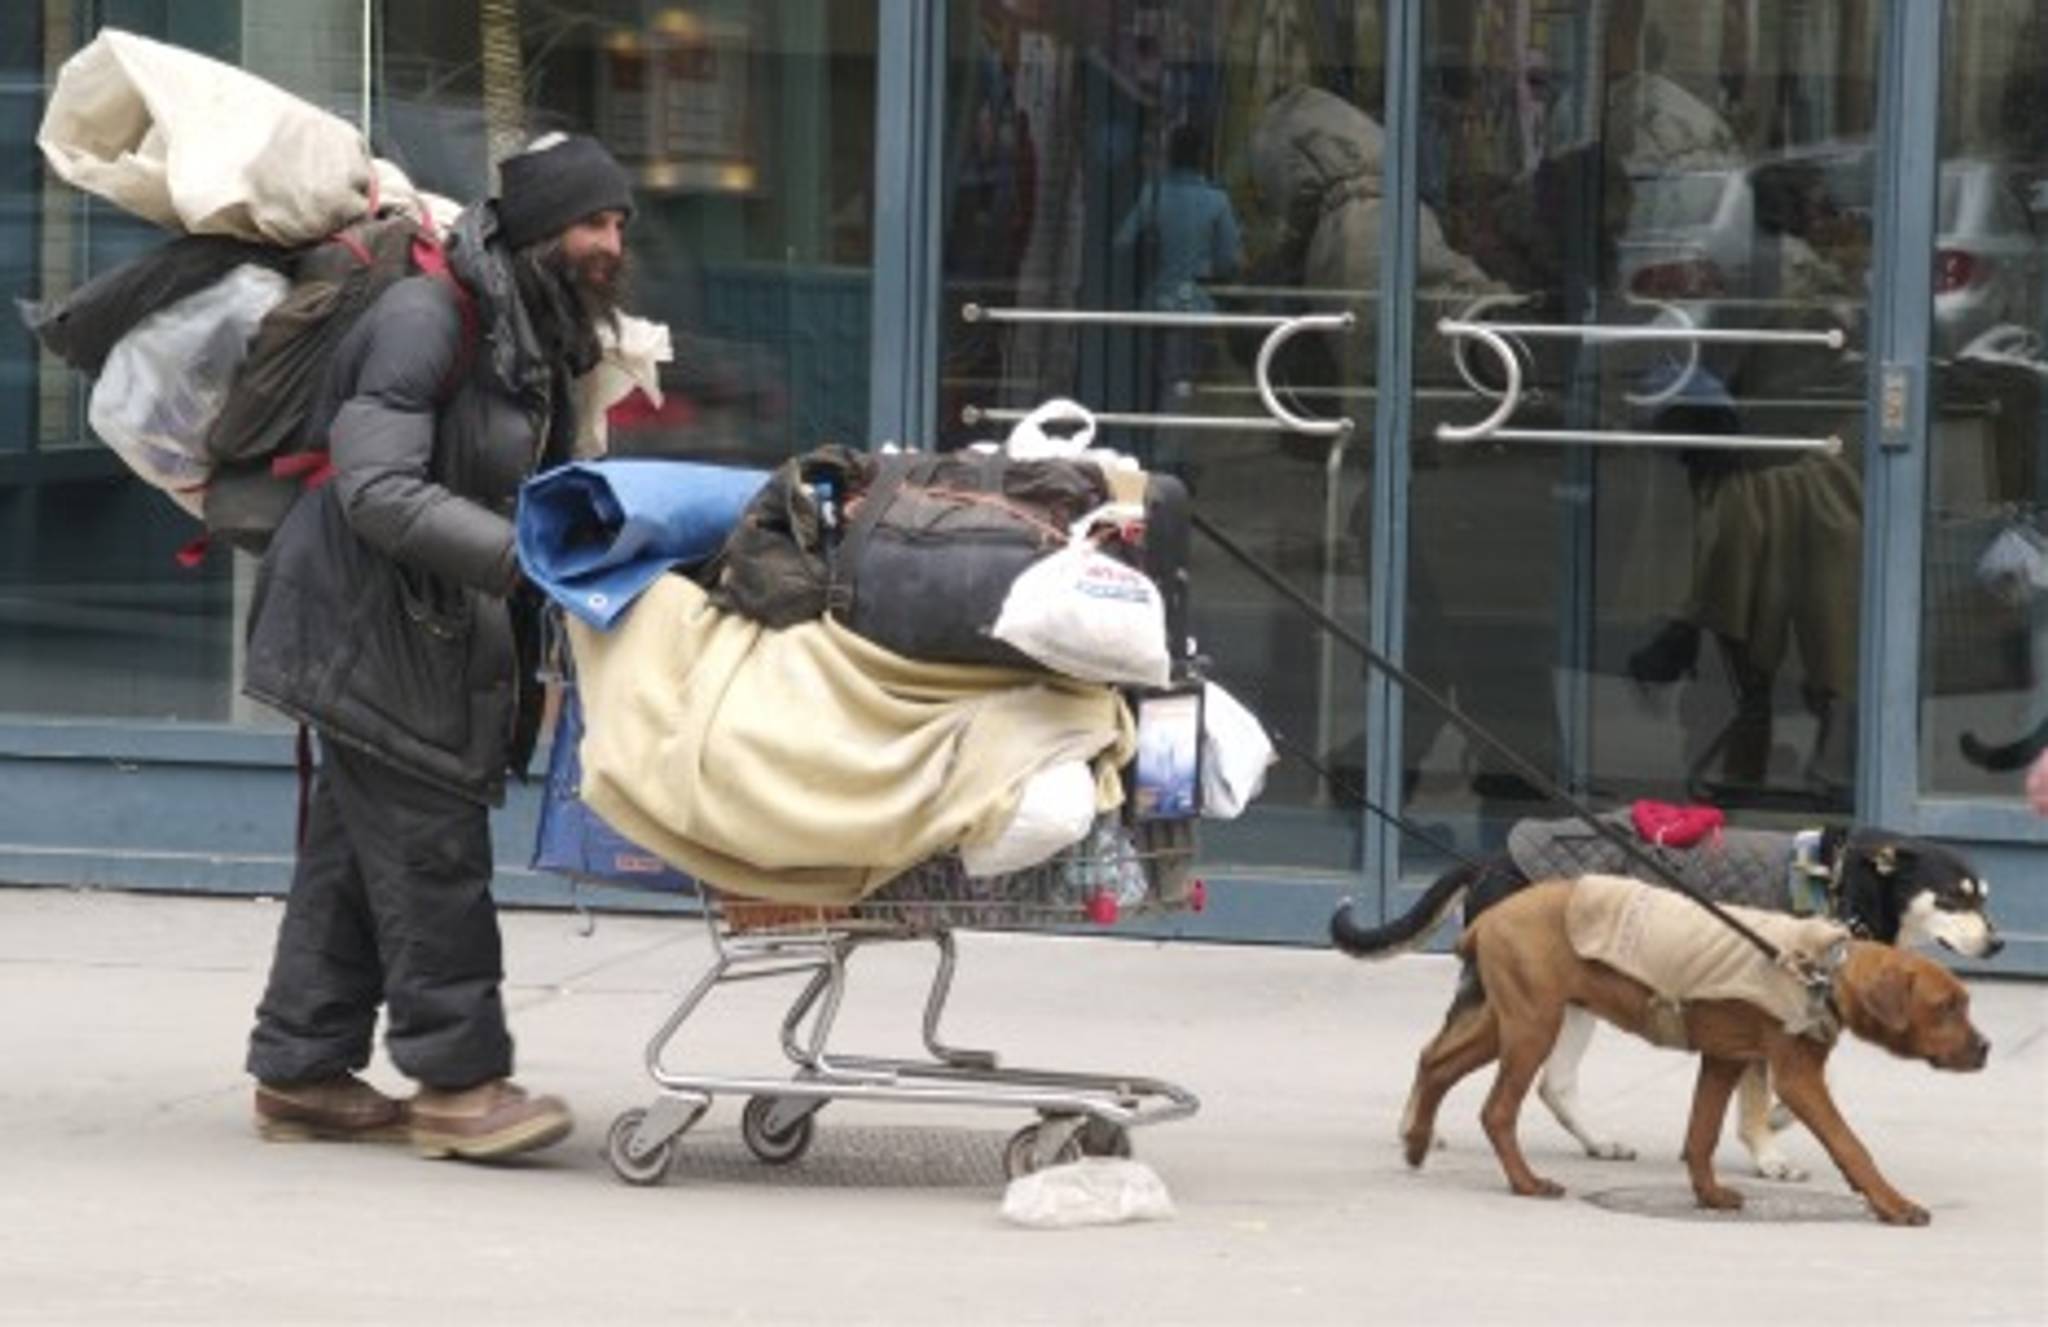 Crowdfunding to help the homeless